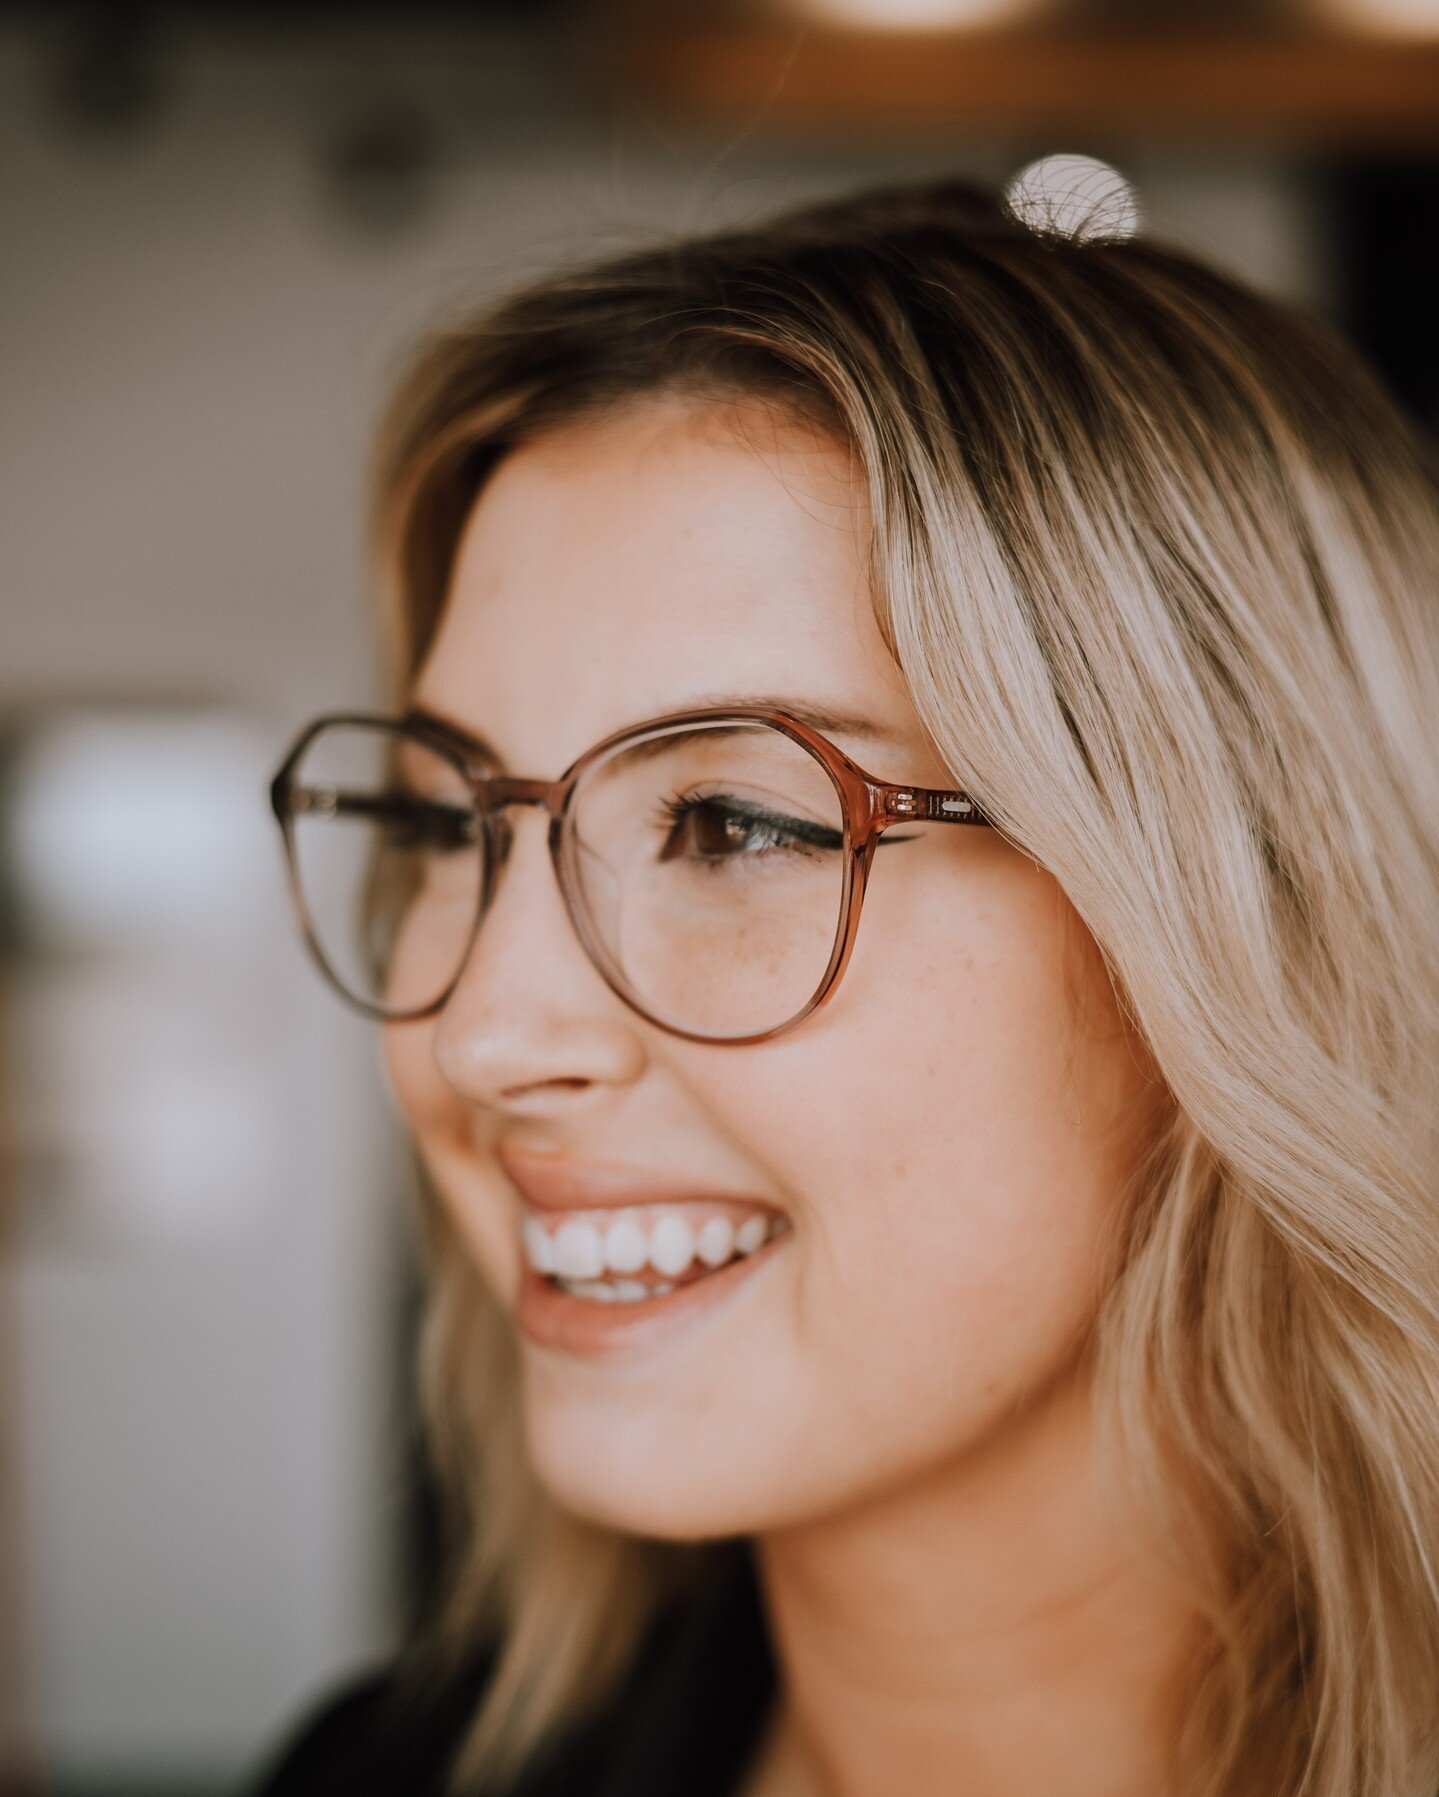 In need of some new specs? 🤓 Now is your chance to snag new frames for 40% if you purchase new Nikon lenses!

Are you the type of person that wants multiple pairs of glasses at once (the more the merrier in our opinion😉)? During our End of Benefits